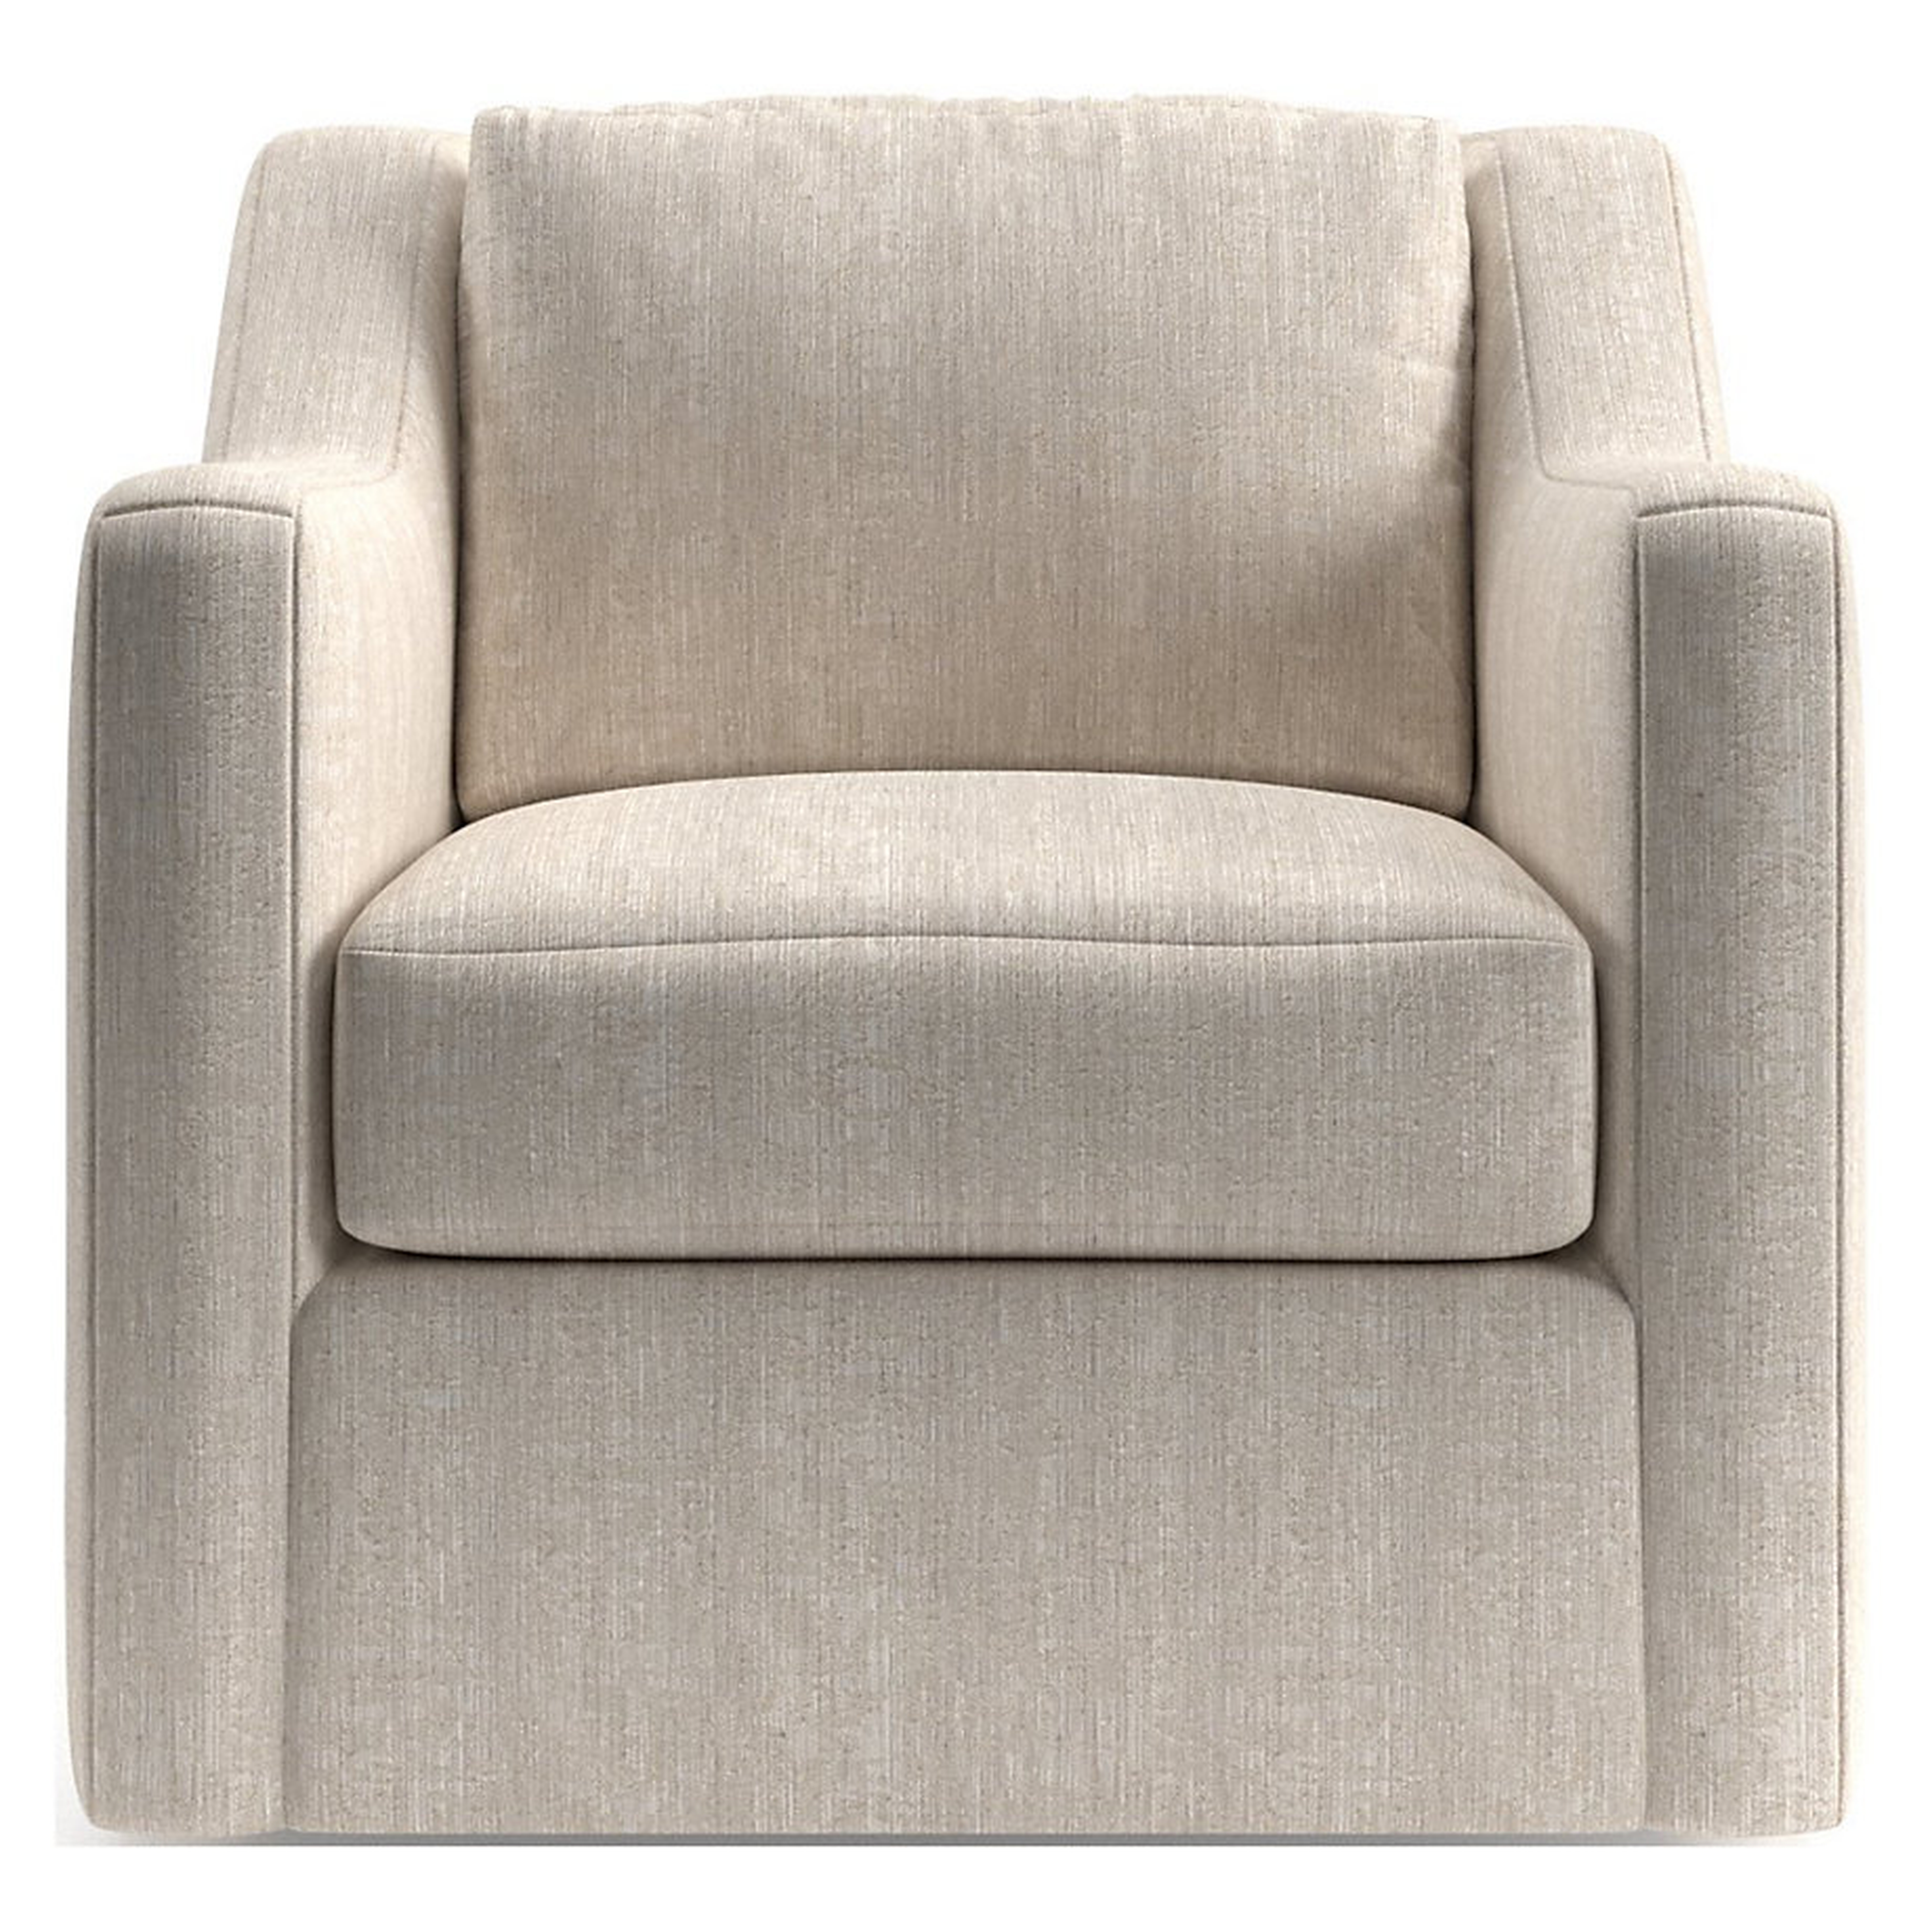 Notch Swivel Chair - Crate and Barrel